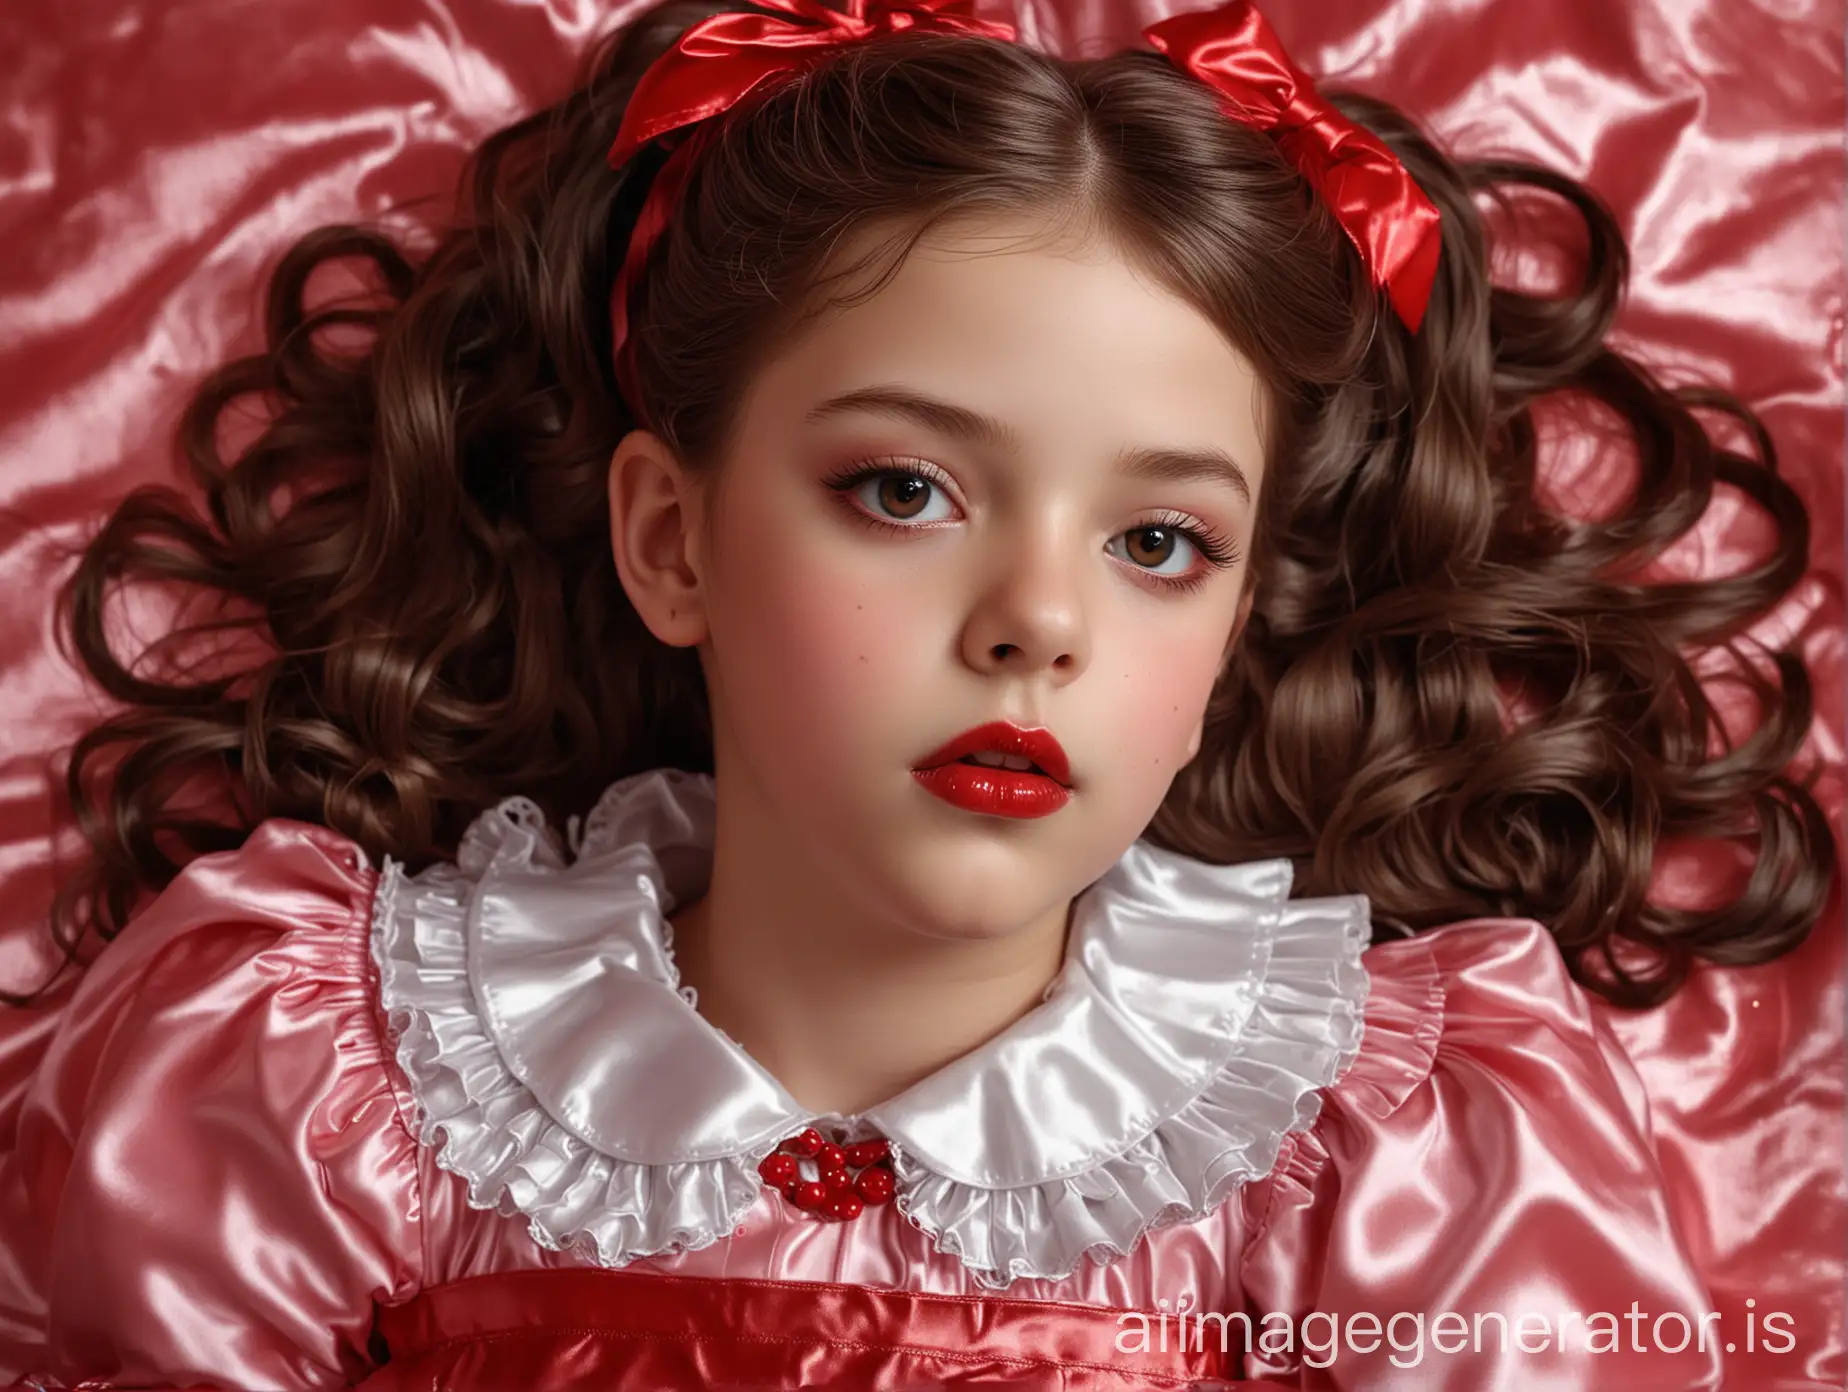 Hyperrealistic-French-Girl-in-Shiny-Satin-Lolita-Outfit